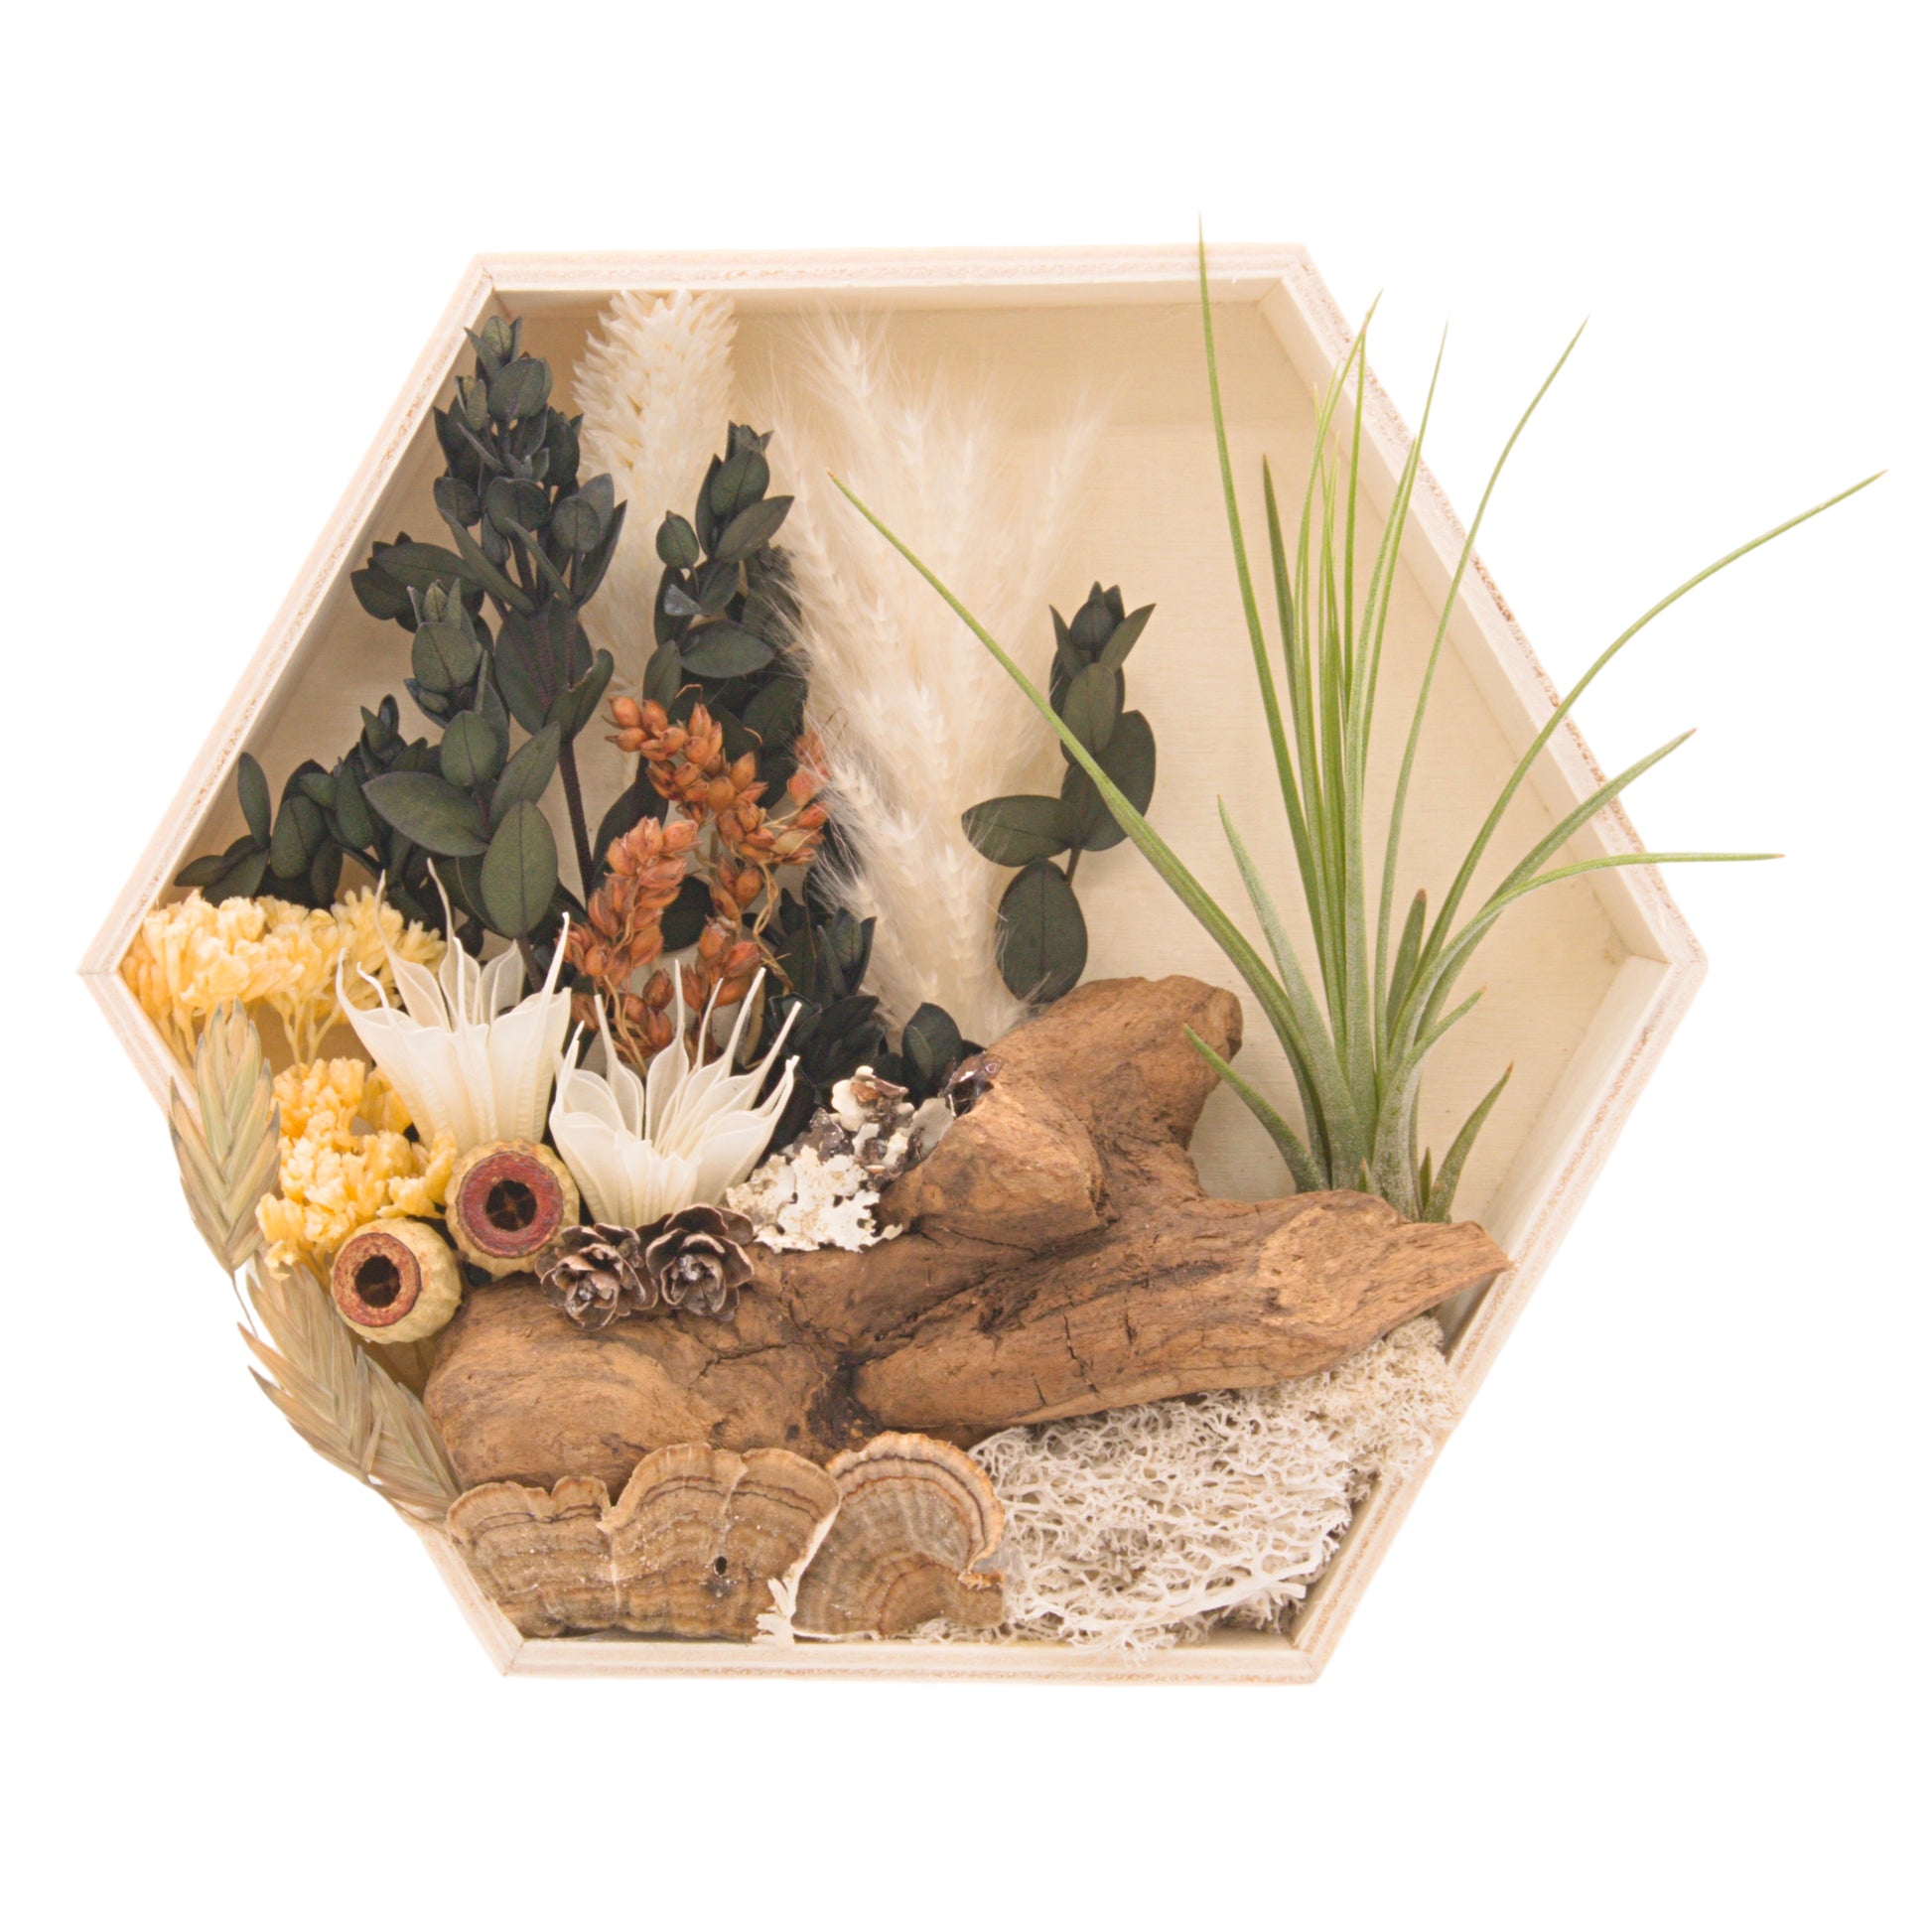 Wooden hexagon box frame filled with dried flowers, moss, wood and an airplant/tillandsia